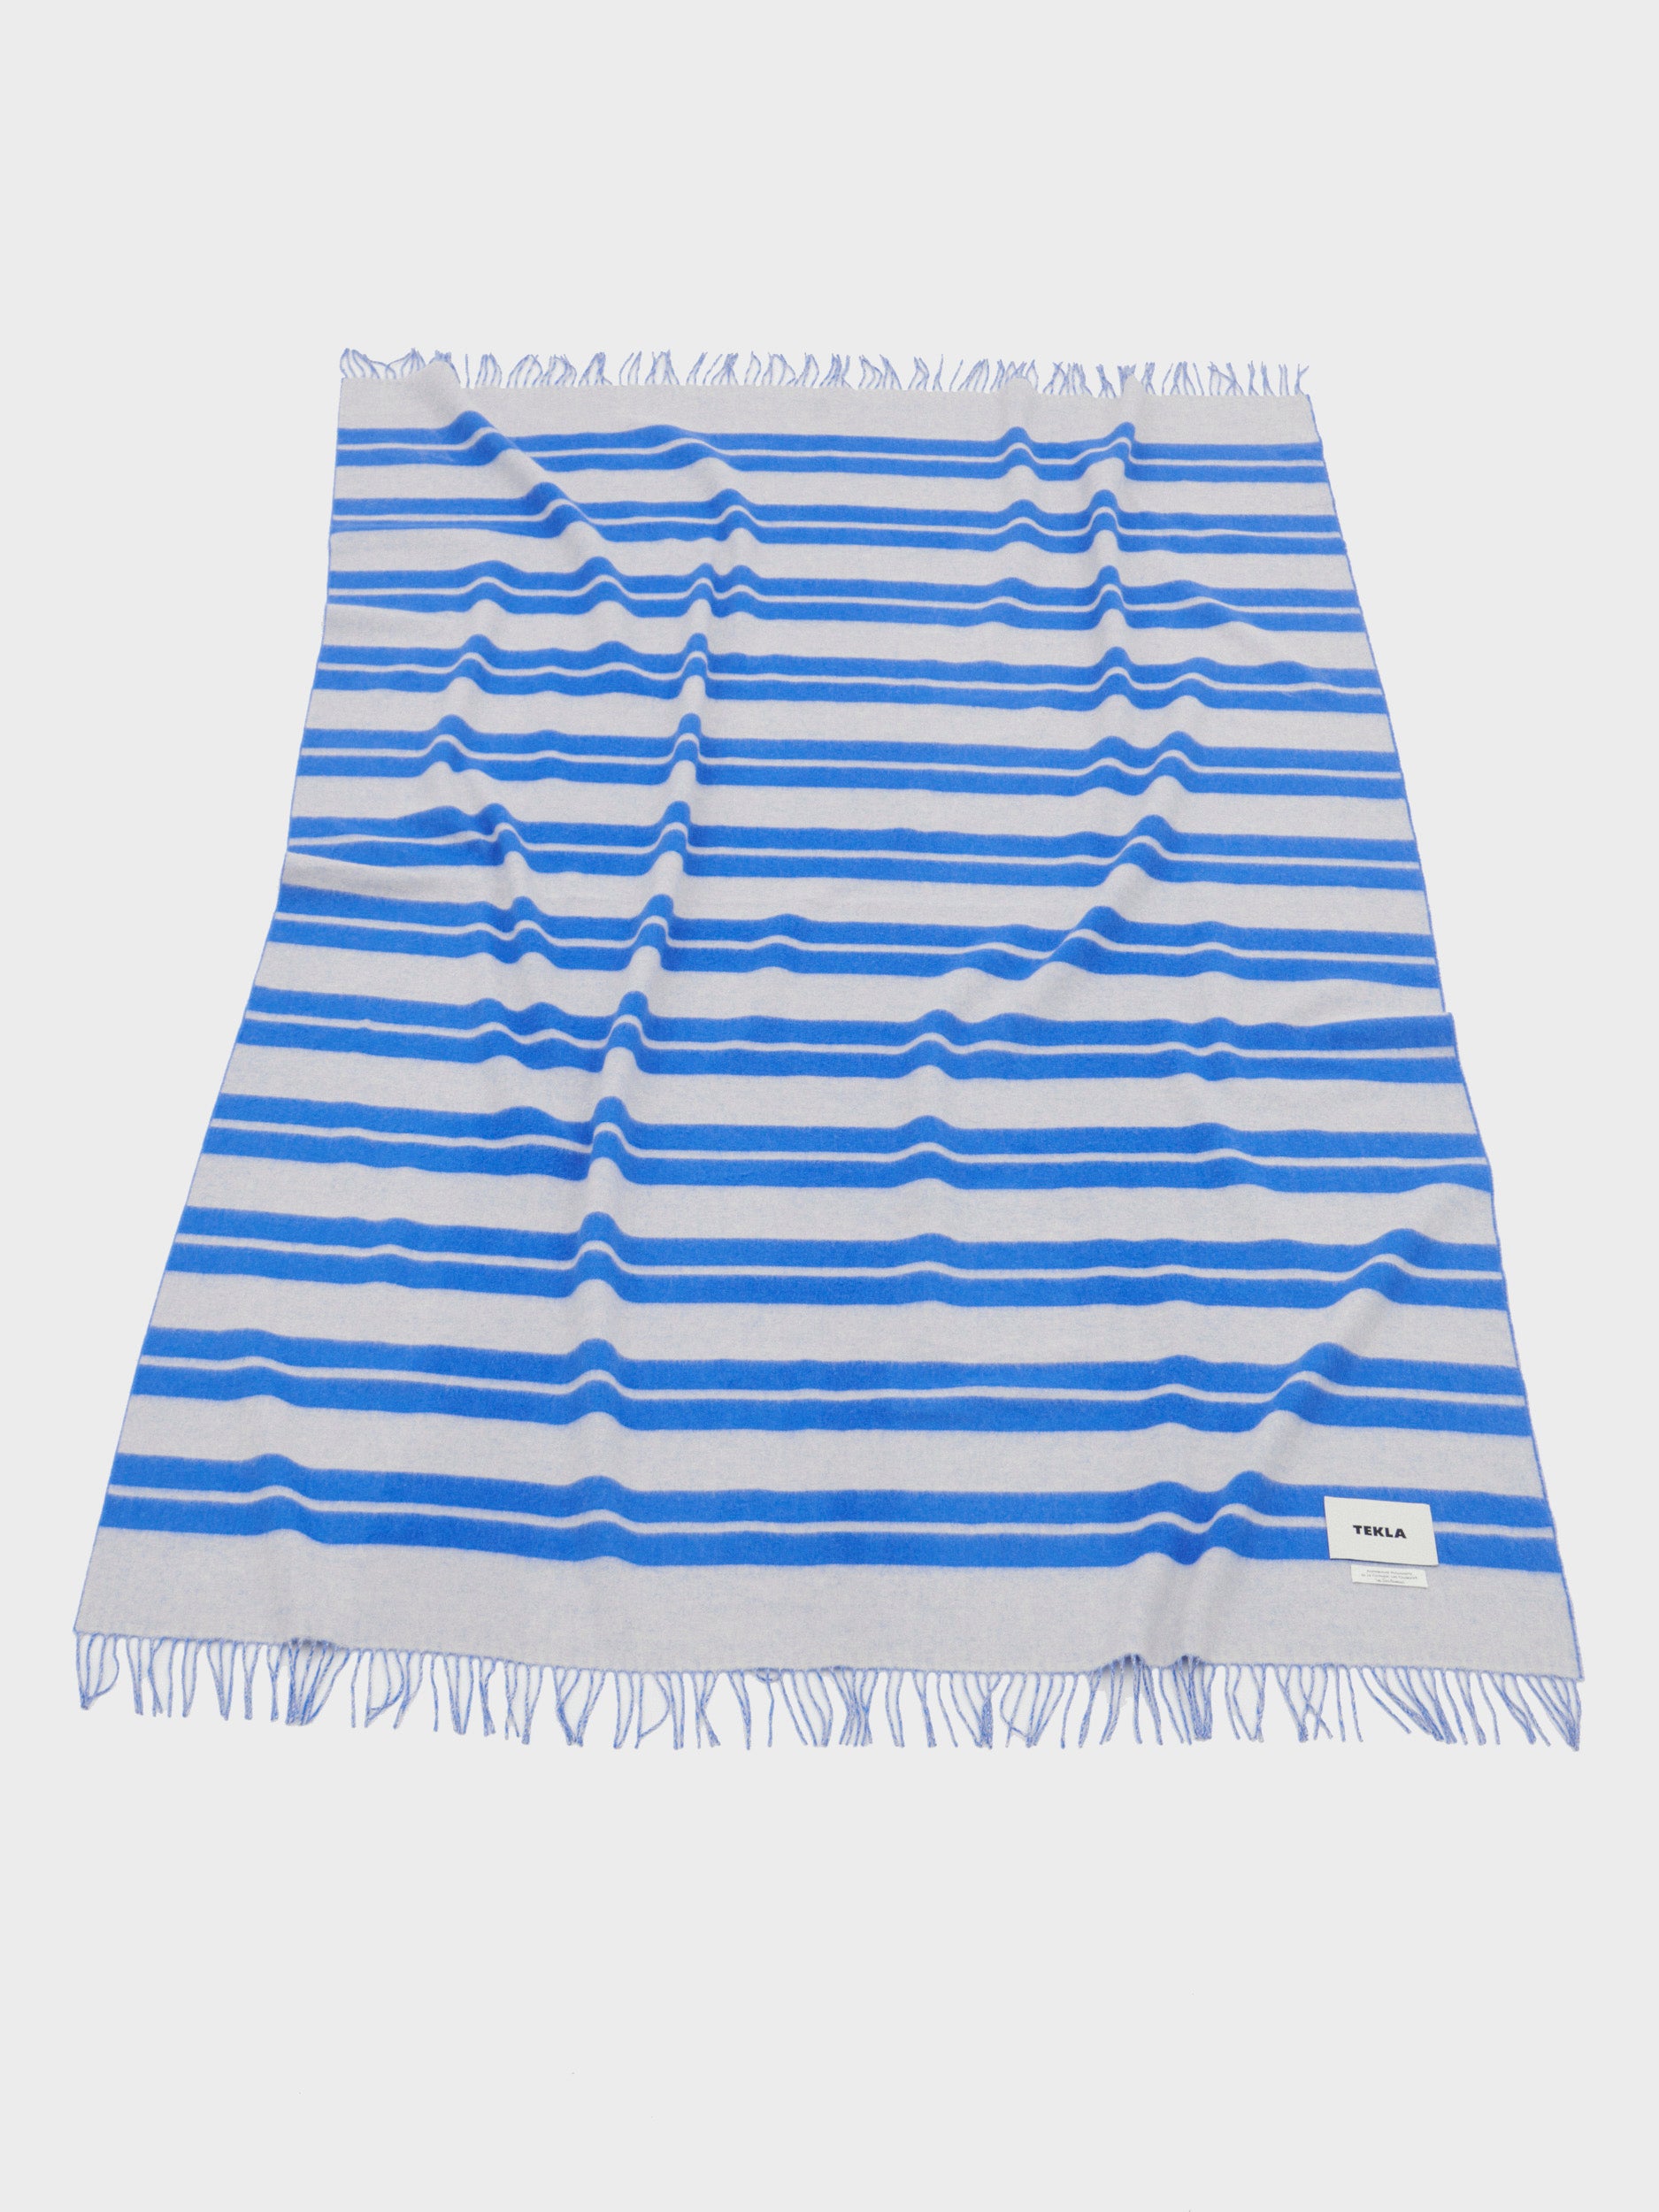 Tekla x Le Corbusier Lambswool Blanket in Blue Outremer and Blanc